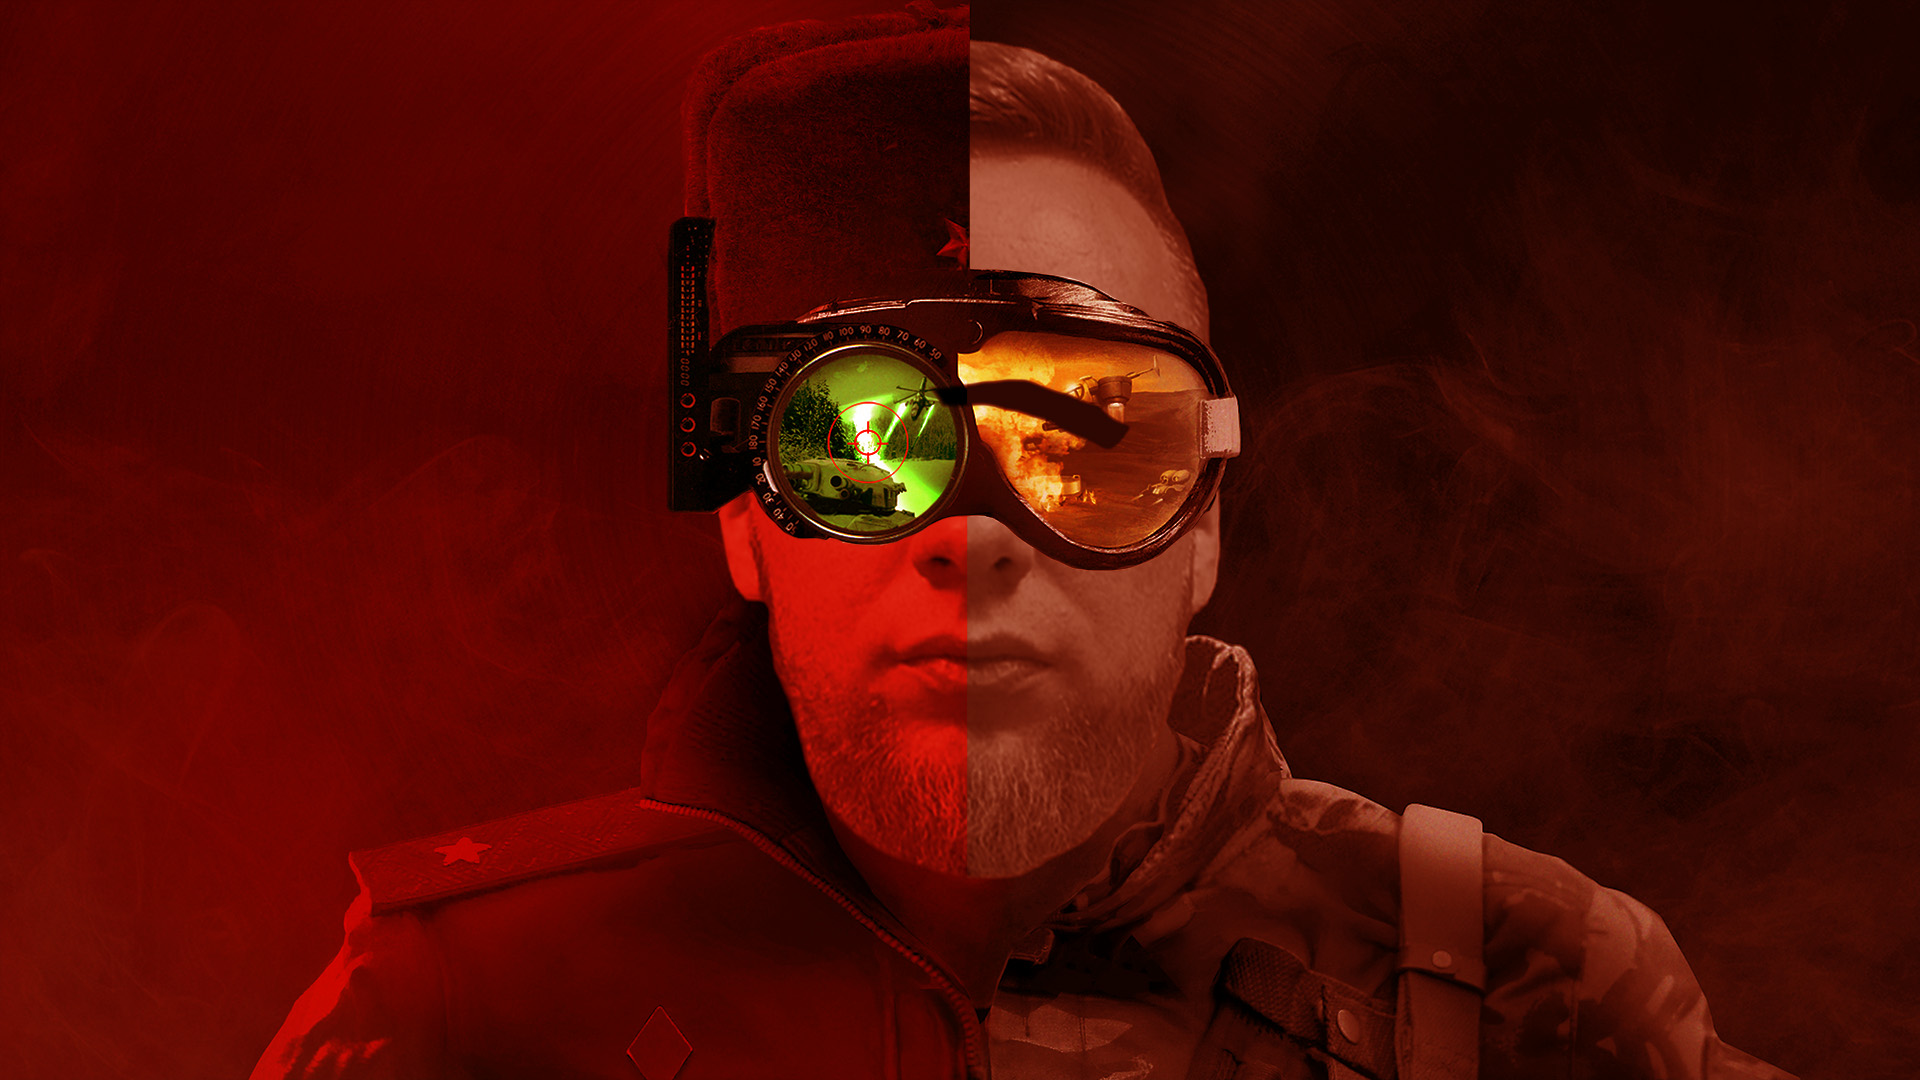 Command and conquer remastered. Red Alert Remastered. Command and Conquer 2020. Red Alert 3 Remastered.